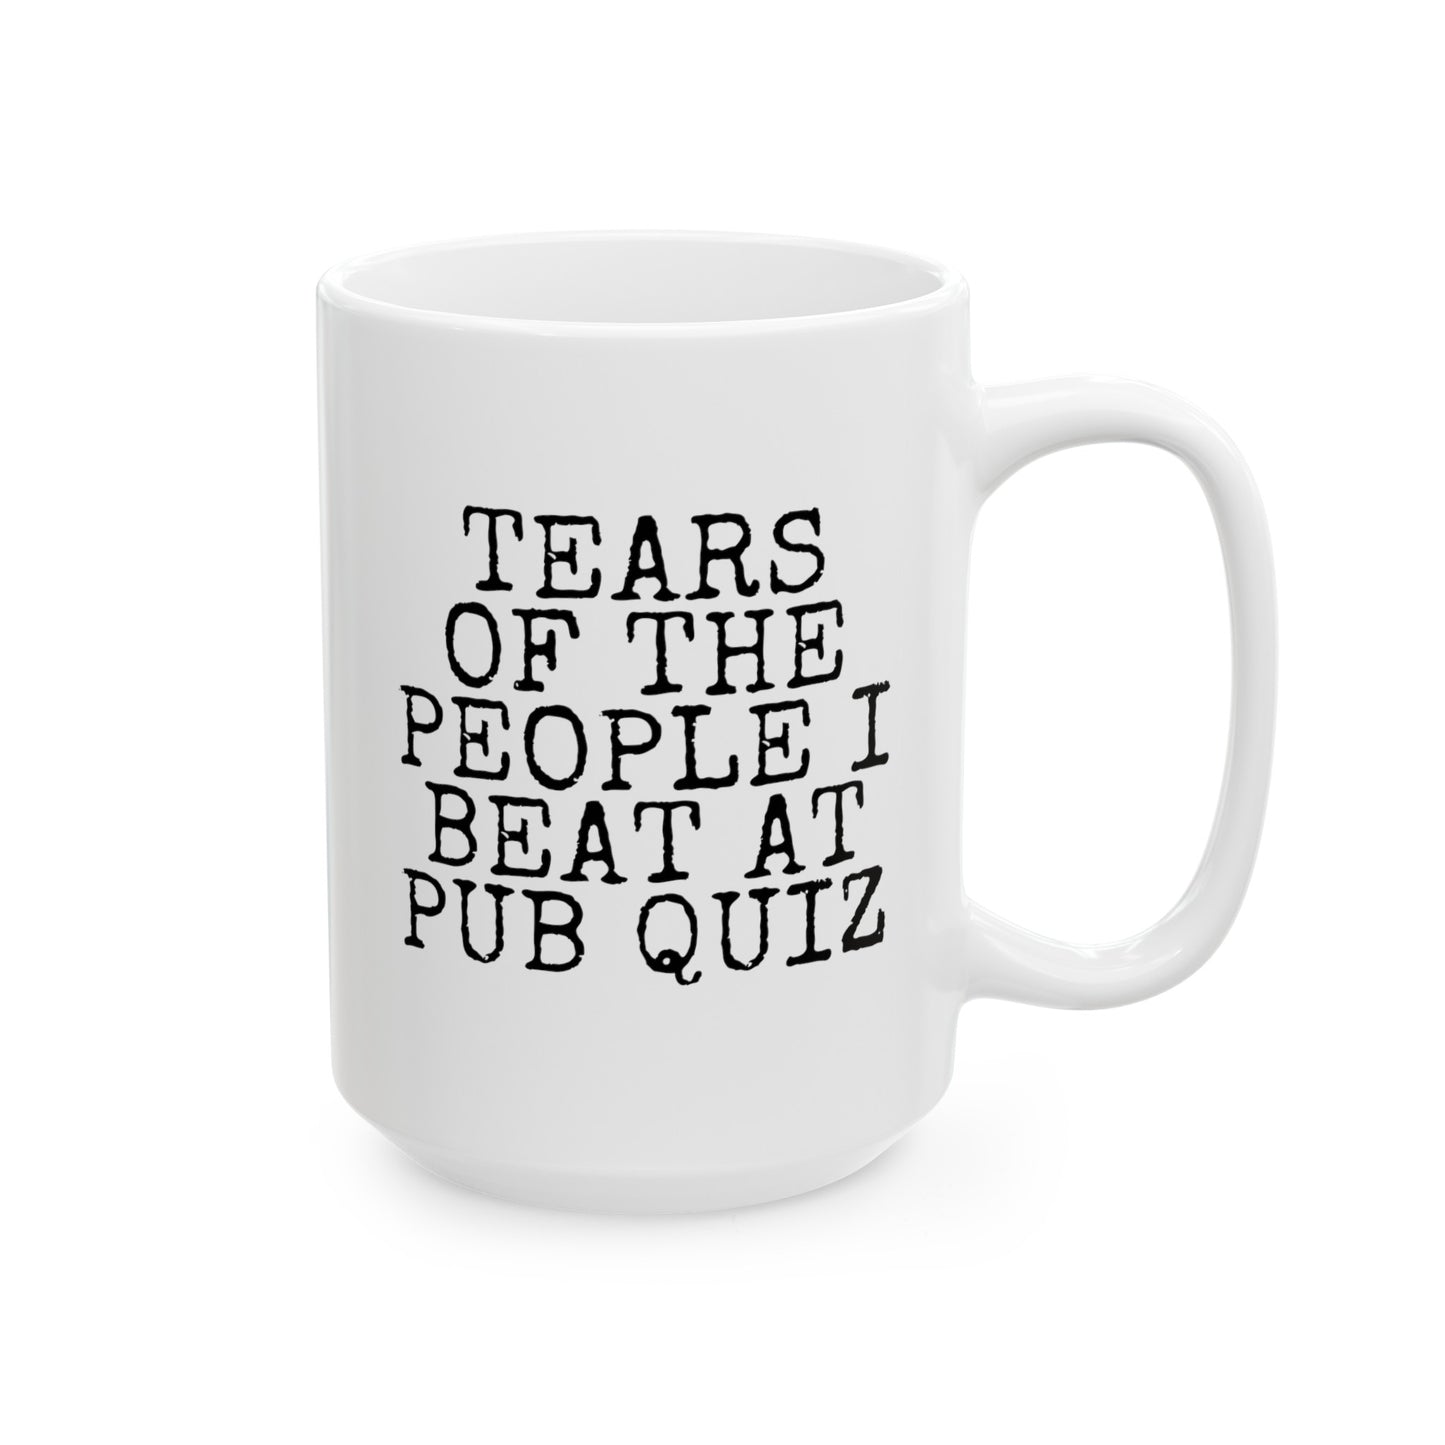 Tears Of The People I Beat At Pub Quiz 15oz white funny large coffee mug gift for British UK mate bar games night friends him her waveywares wavey wares wavywares wavy wares